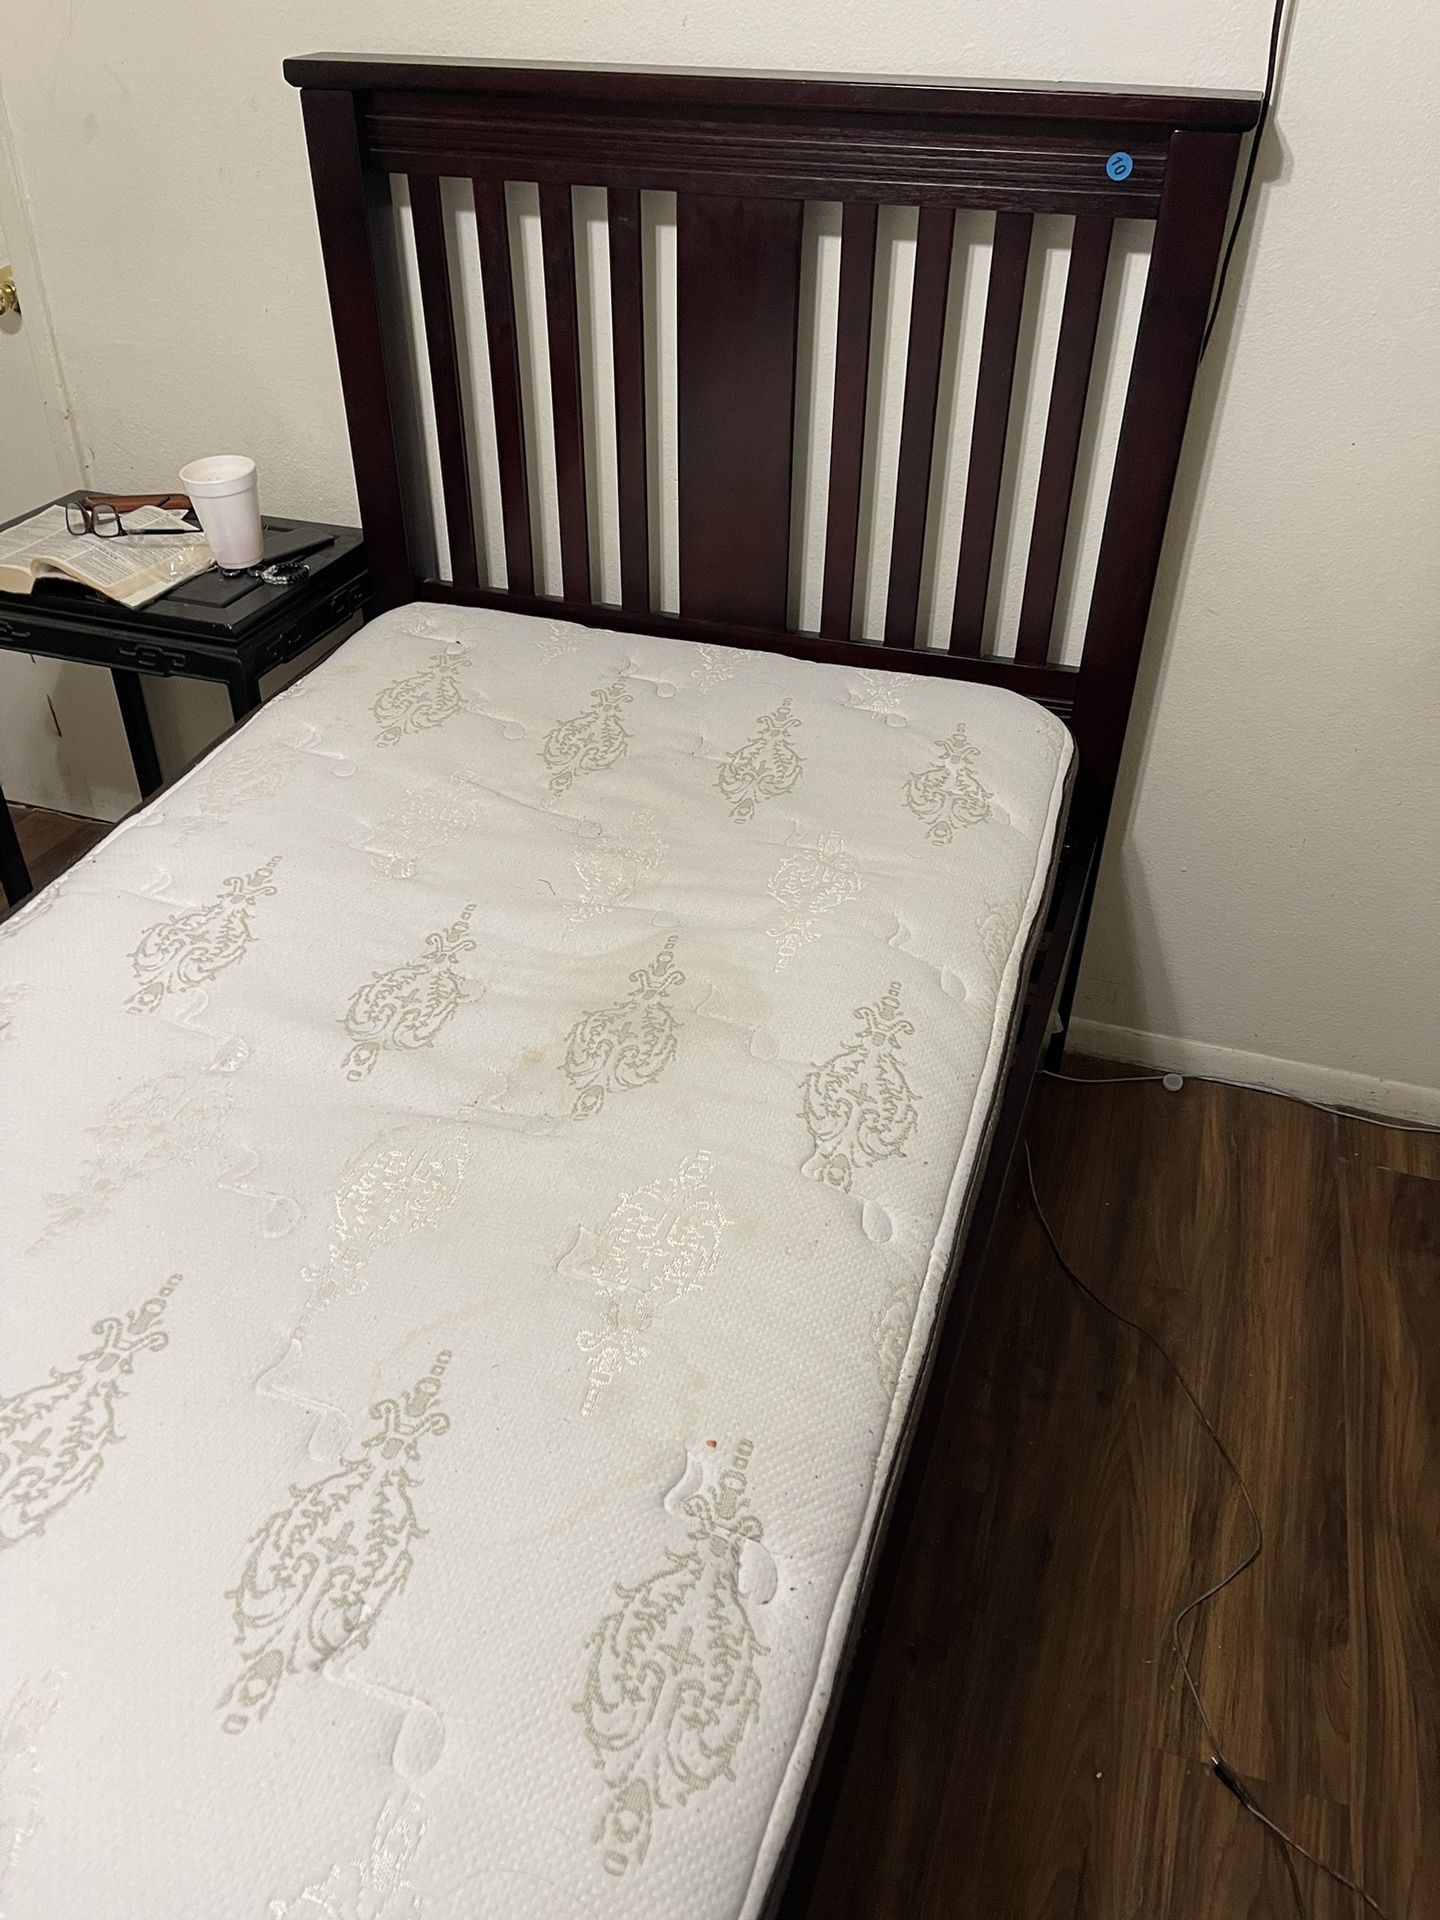 Twin size mattress and bed frame 